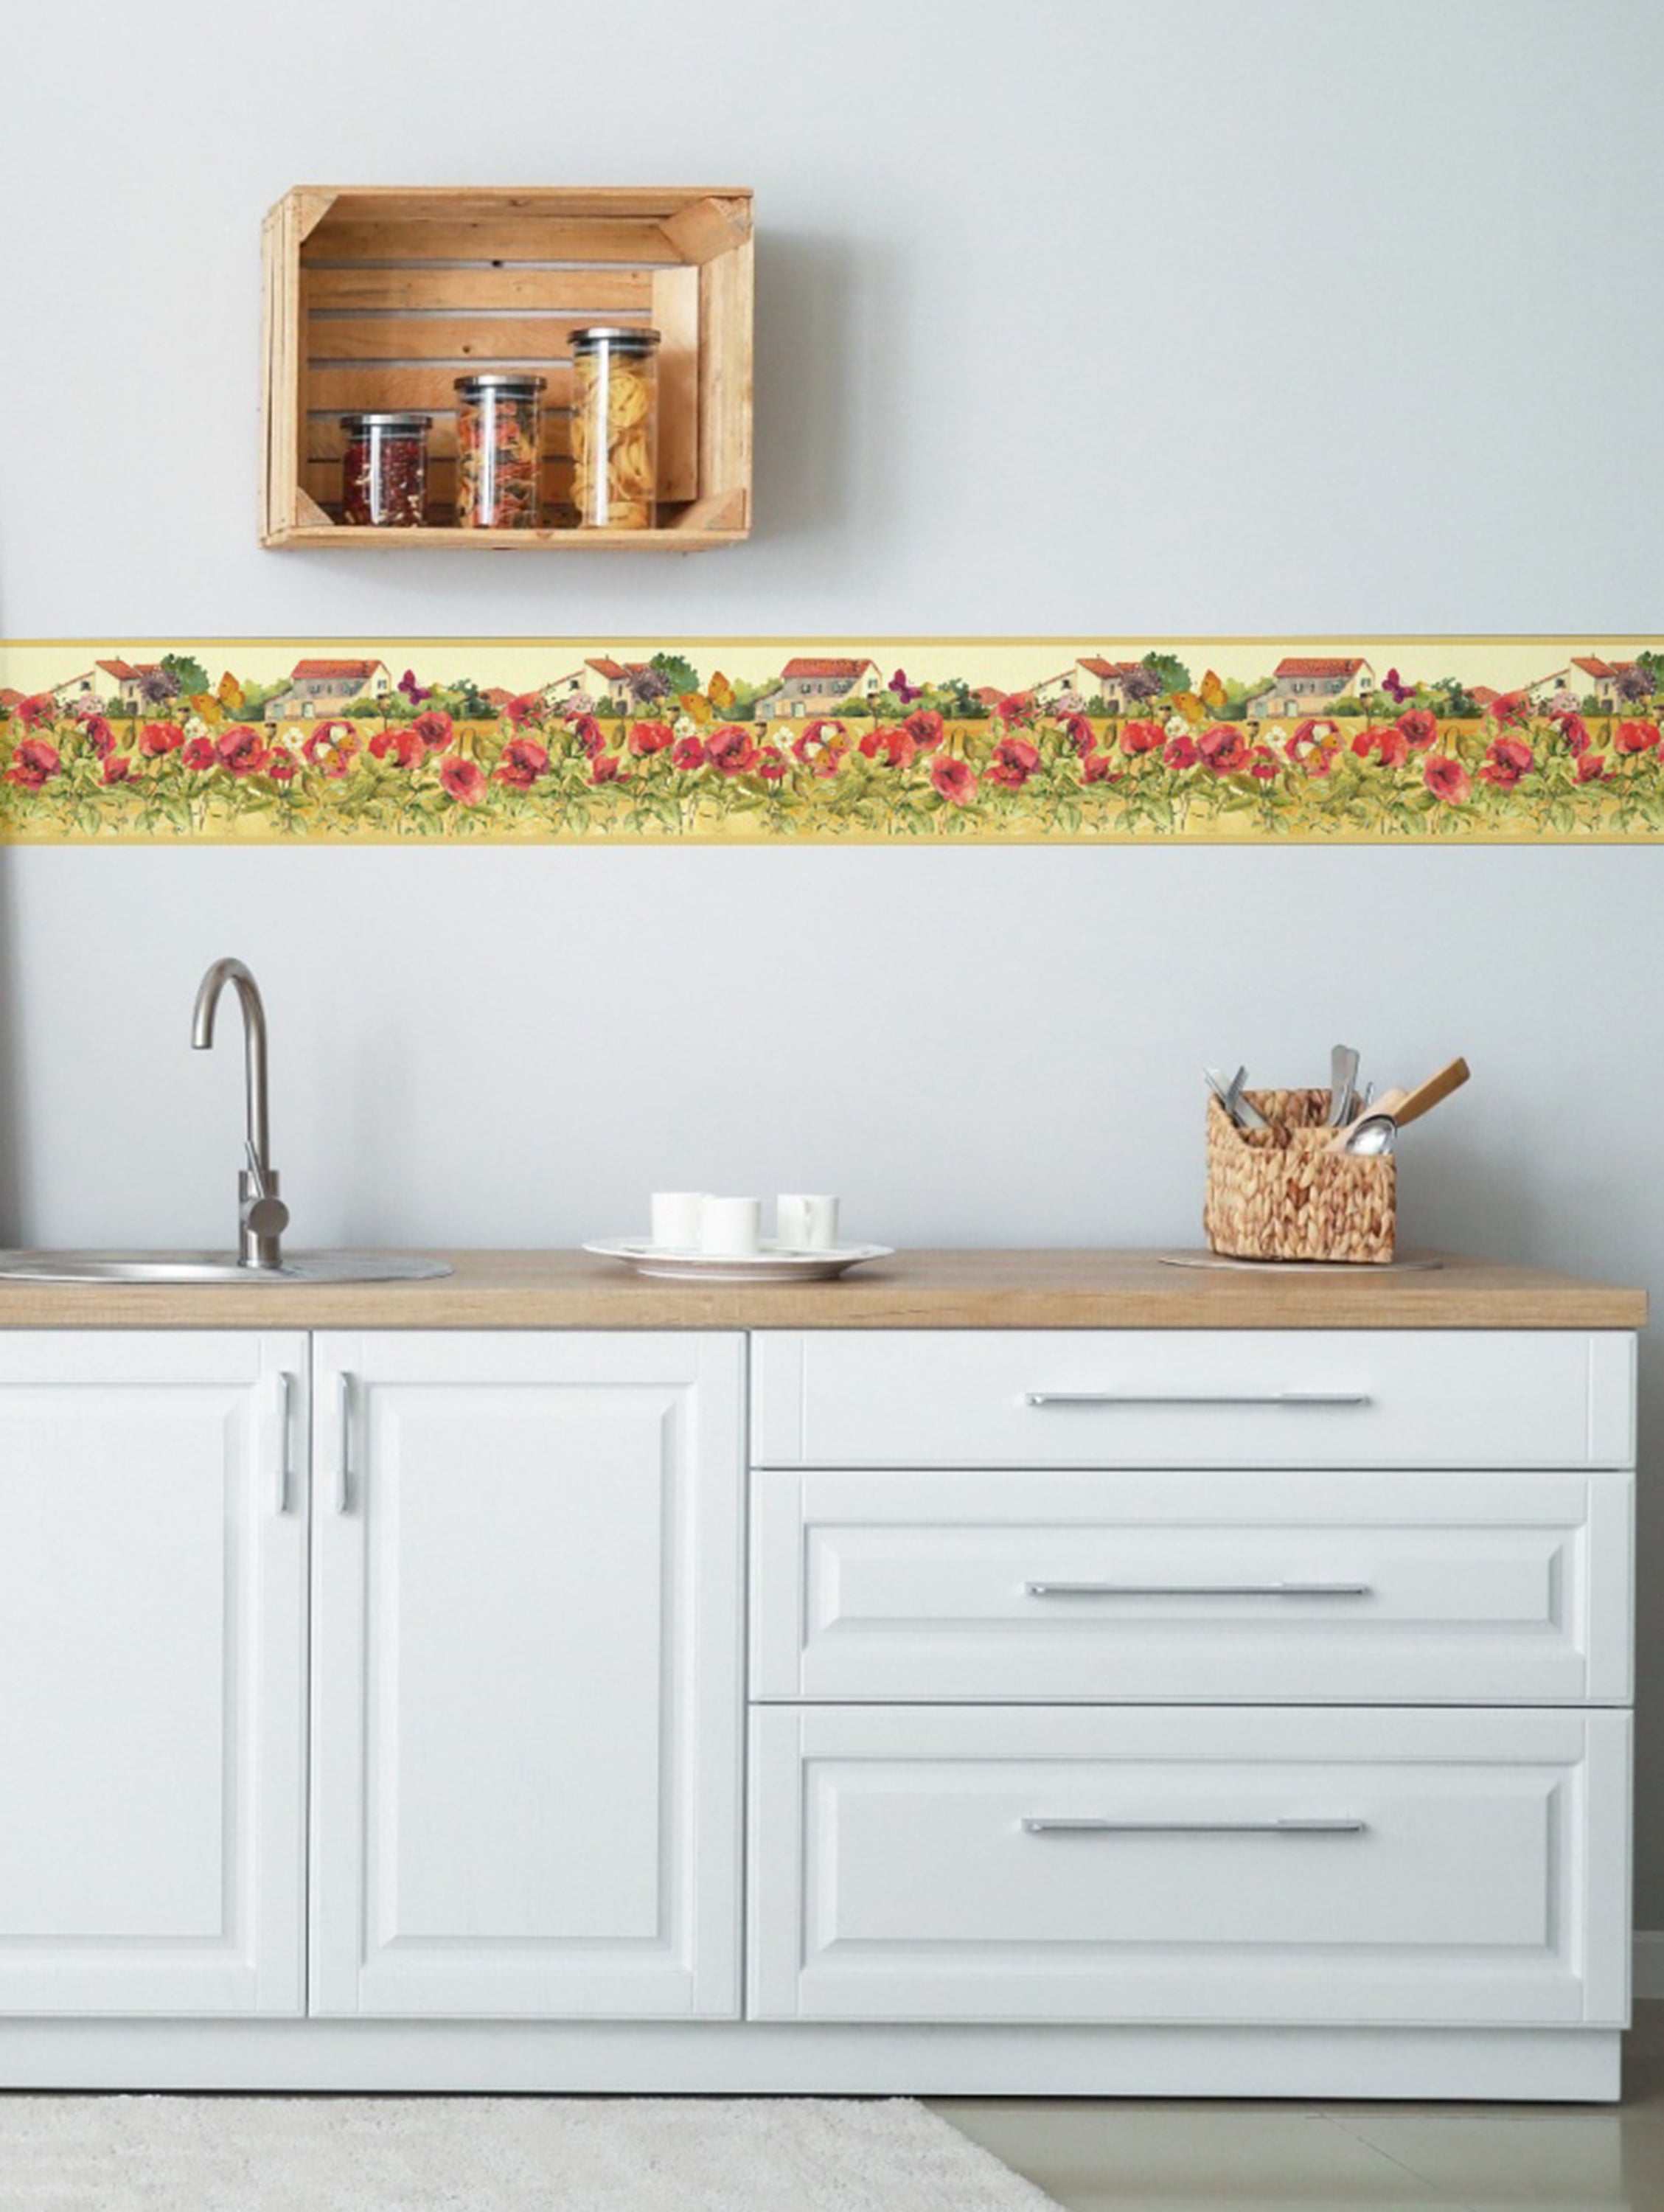 GB50061g8 Countryside Watercolor Flowers Peel and Stick Wallpaper Border 8in Height x 18ft Tan / Red / Green